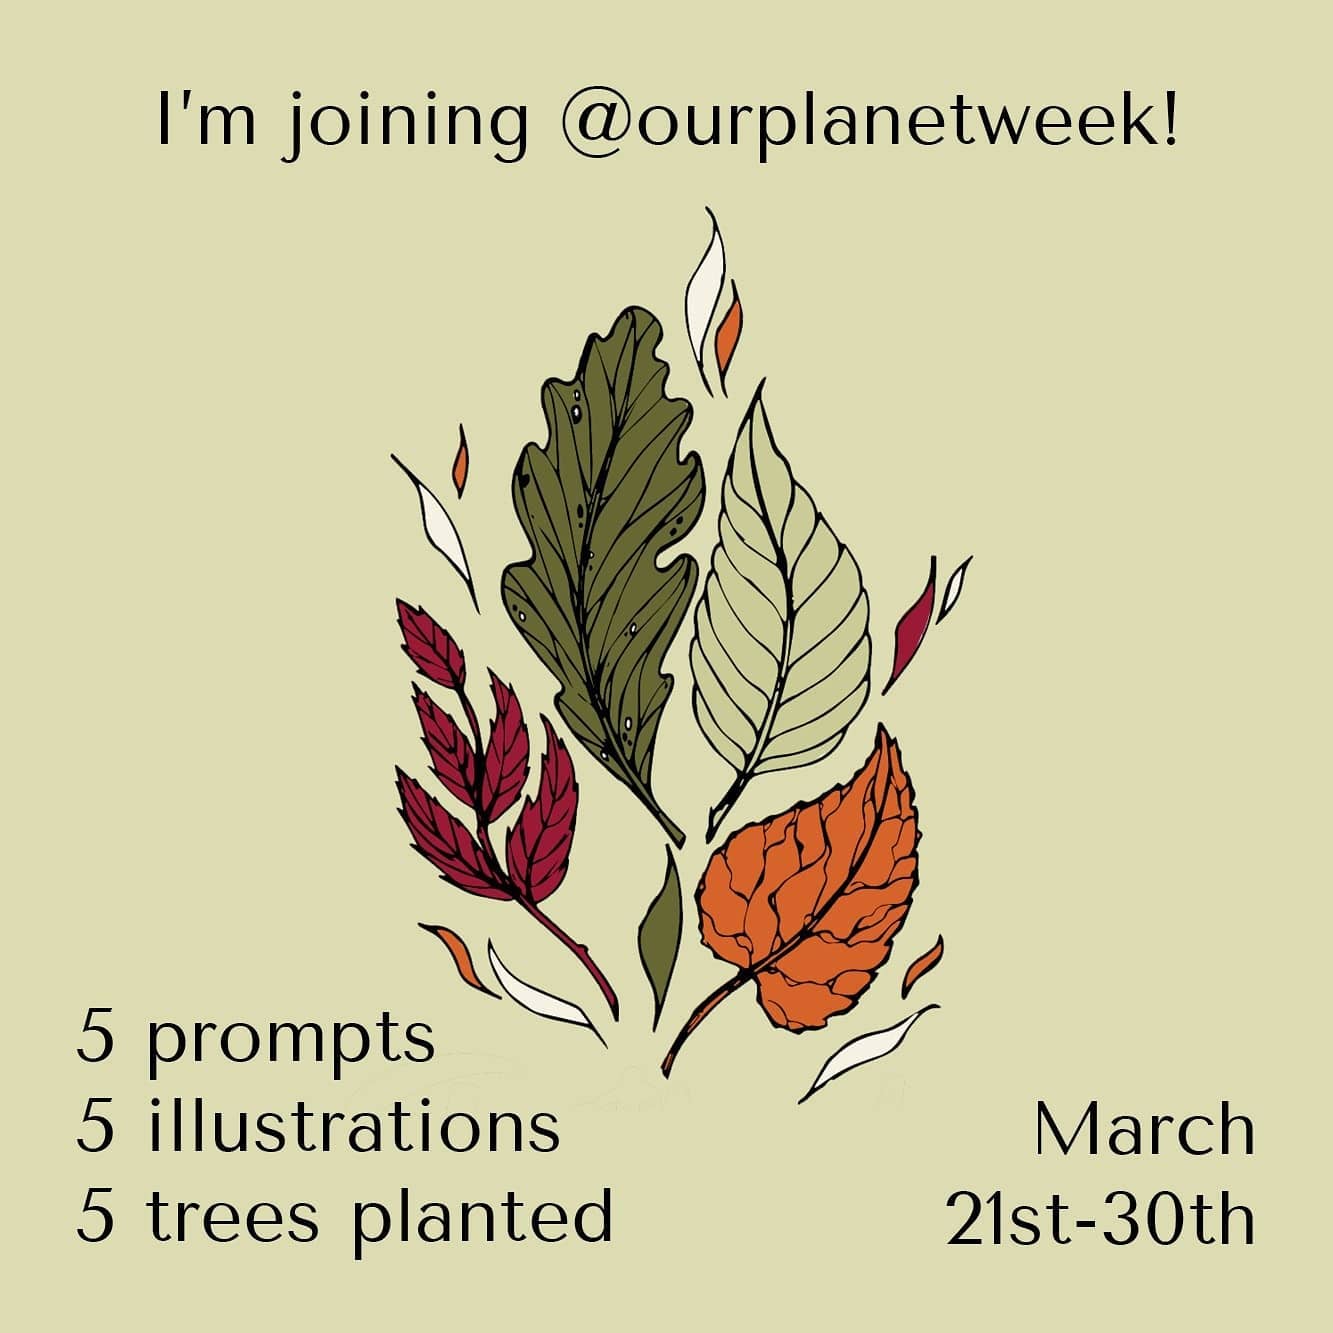 I'm joining @ourplanetweek ! A global art project with 5 prompts, to create 5 illustrations. For every illustration made and posted with the tags, a tree will be planted ????! Will you join me?#letsdrawthechange #ourplanetweek #onetreeplanted